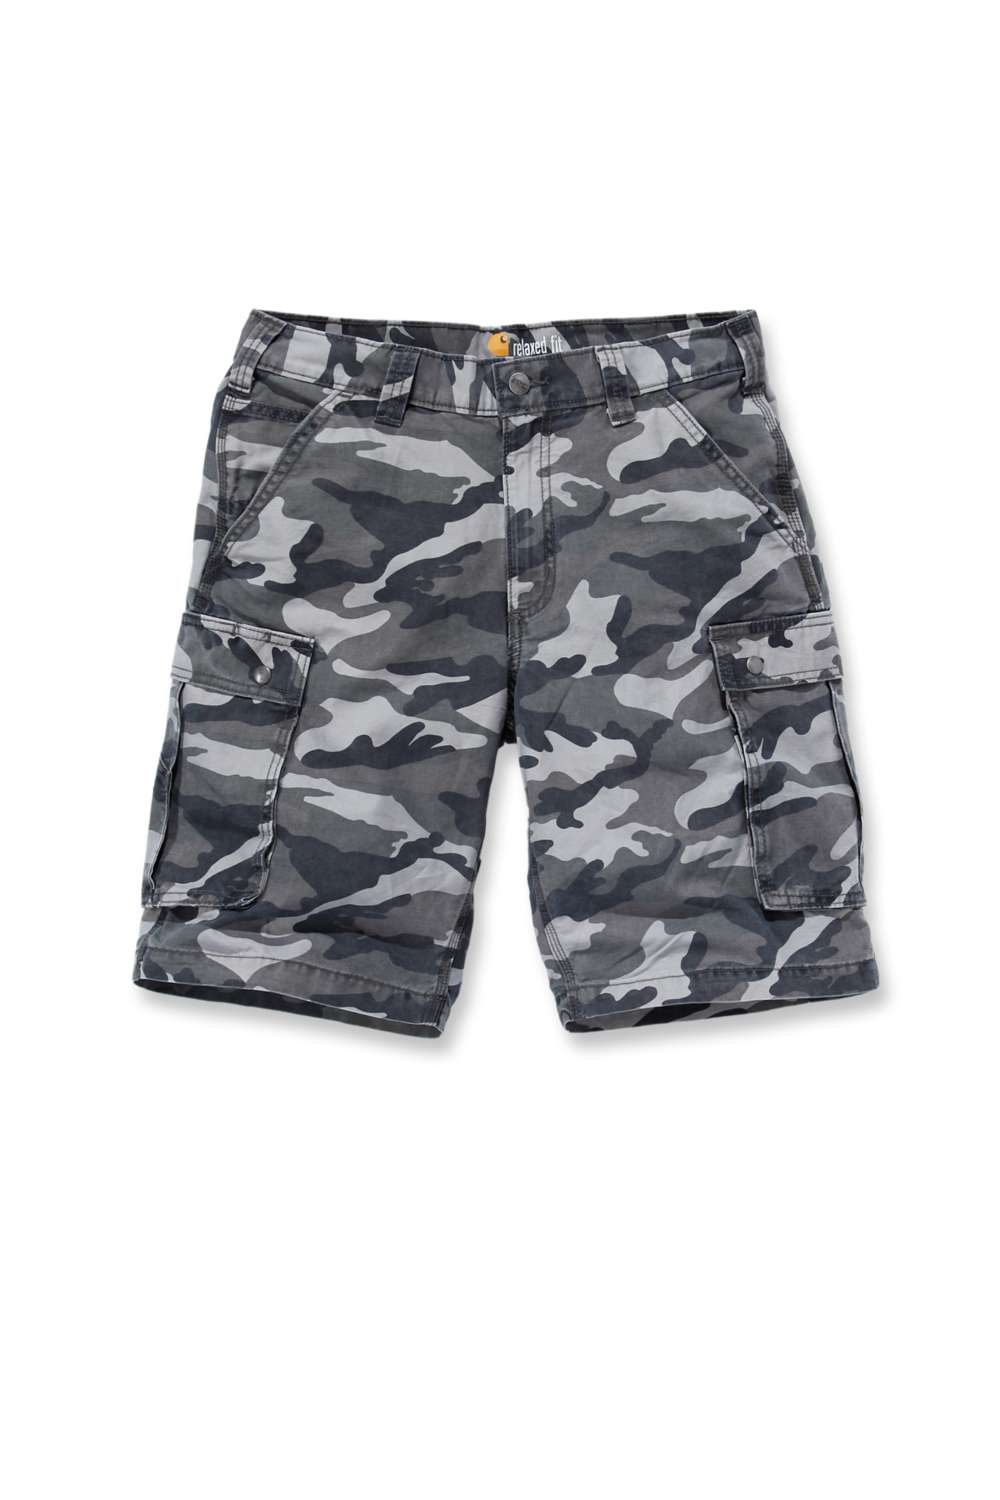 RUGGED CARGO CAMO Herren Arbeitsshort Relaxed Fit, Camouflage